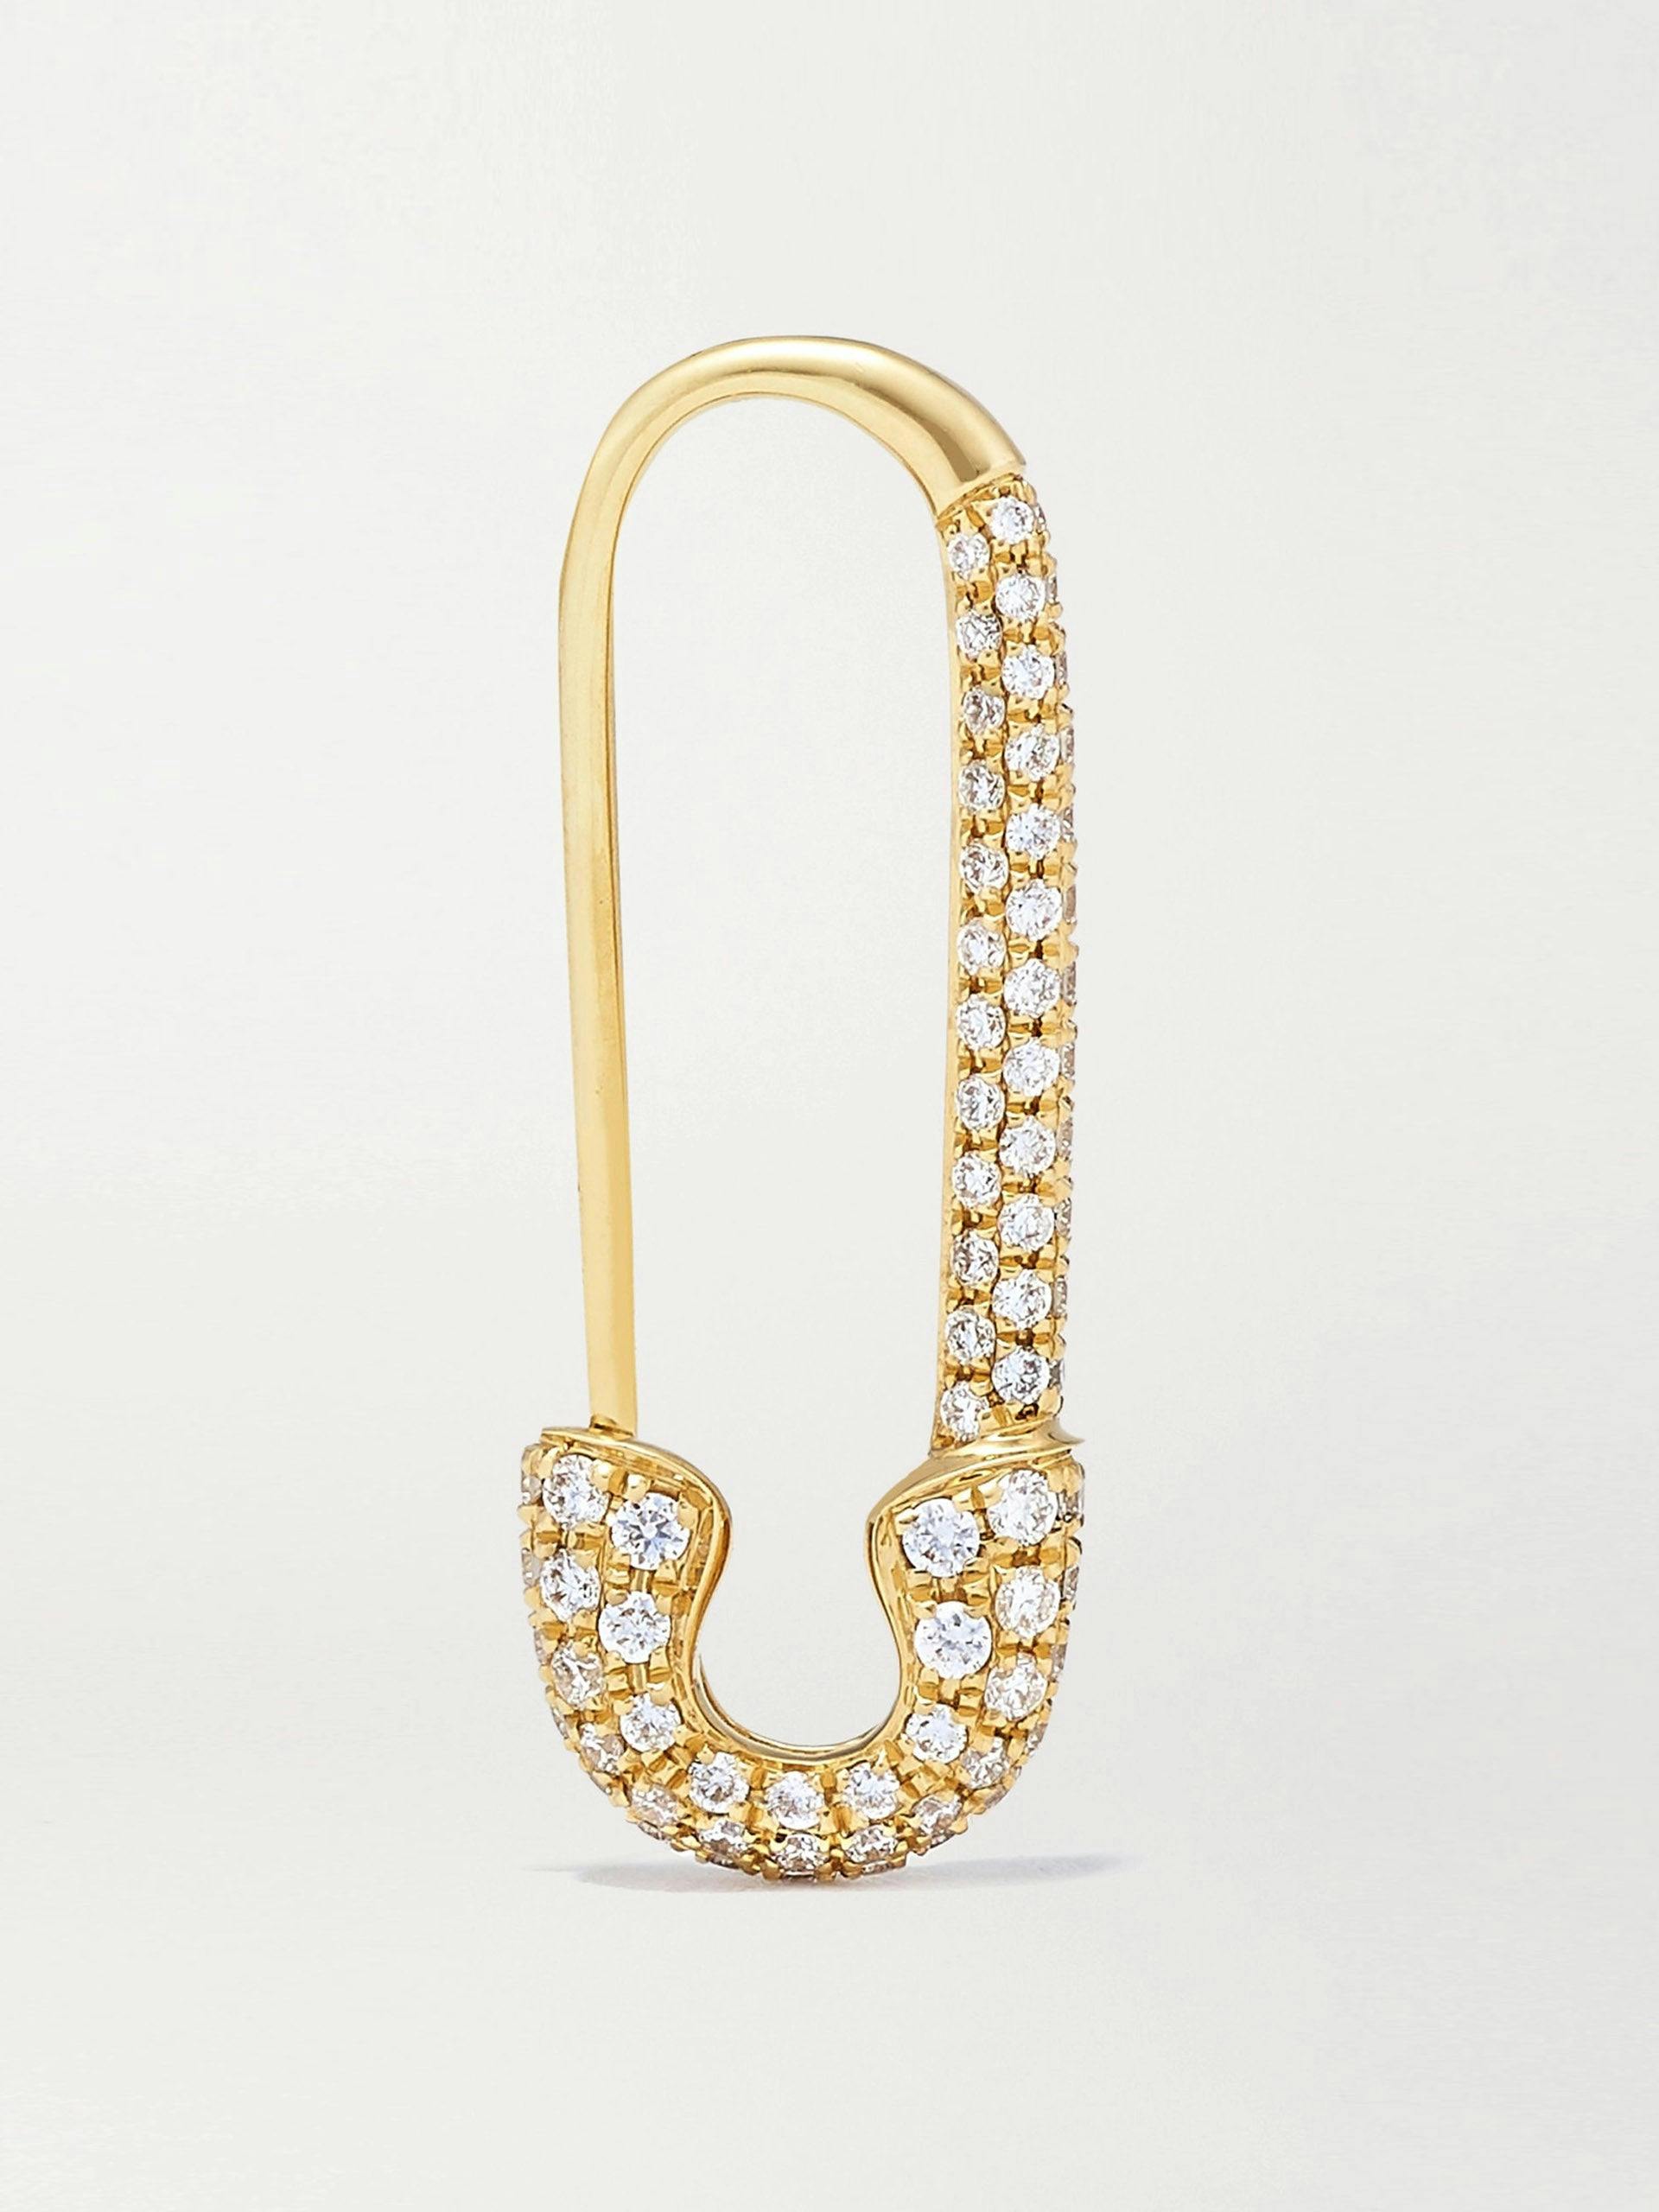 Safety Pin gold diamond earring